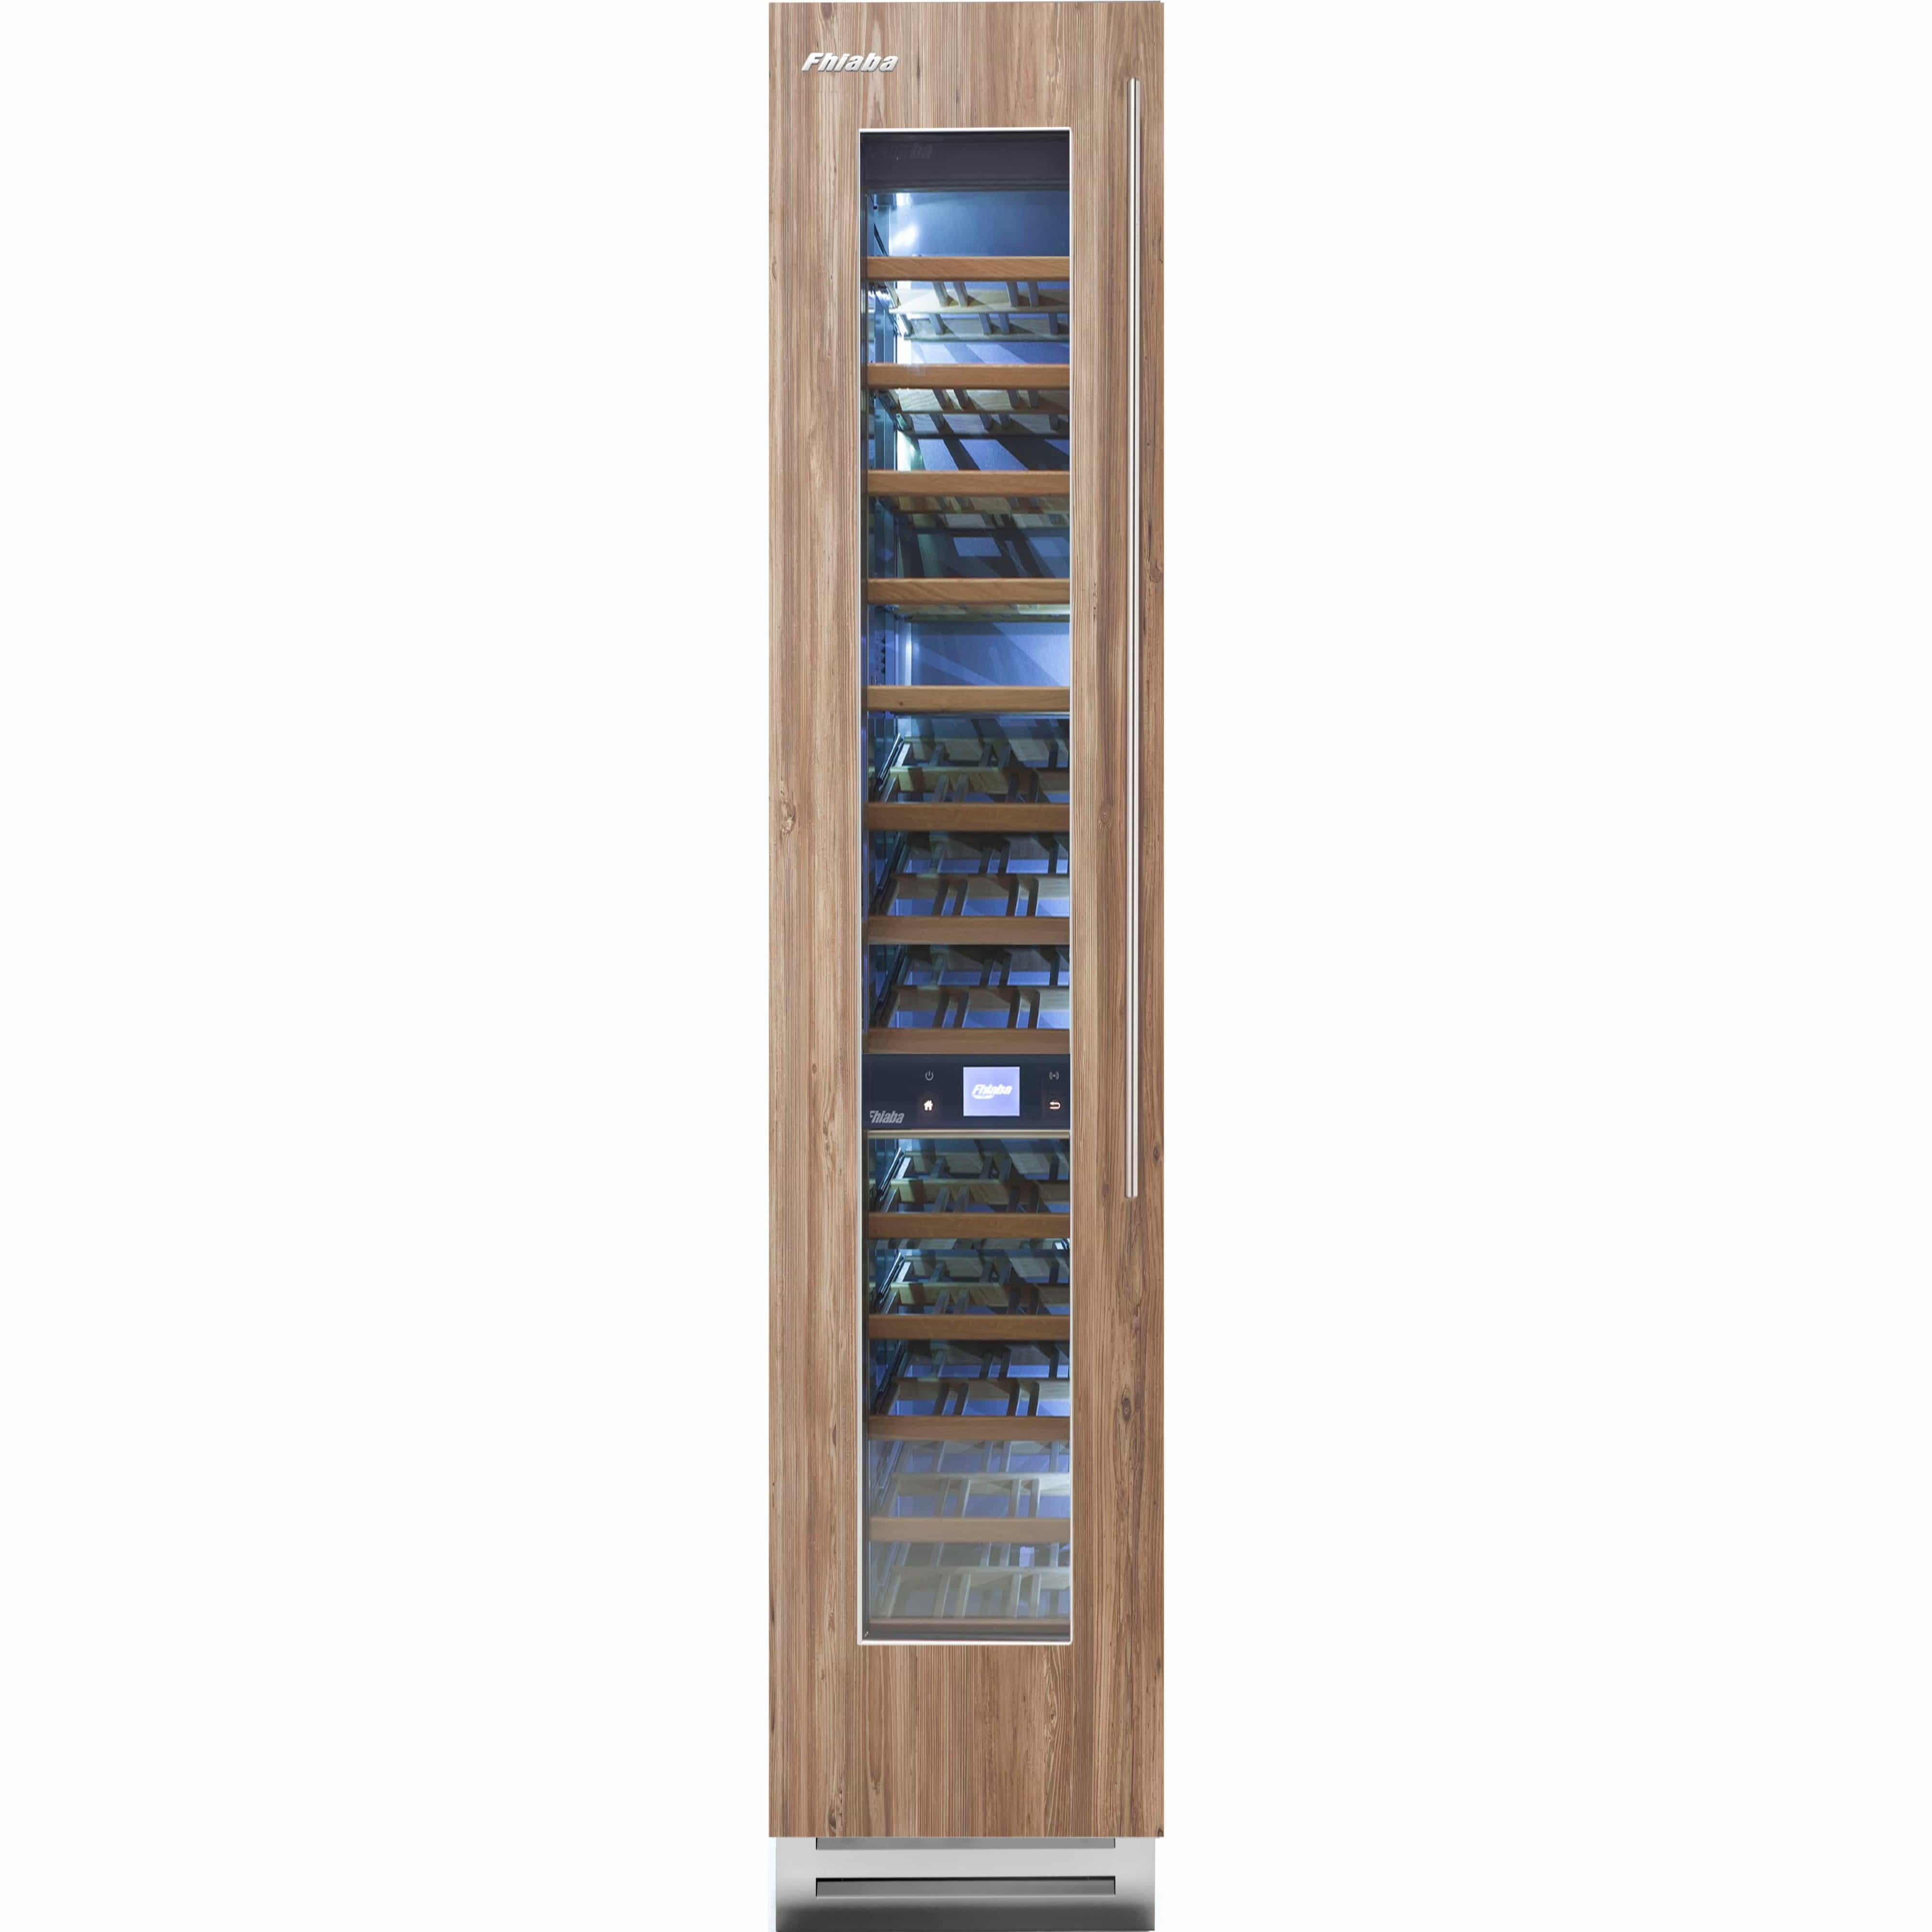 Fhiaba 52-Bottle Integrated Series Wine Cellar with Smart Touch TFT Display FI18WCC-LO2 Wine Storage FI18WCCLO2 Luxury Appliances Direct